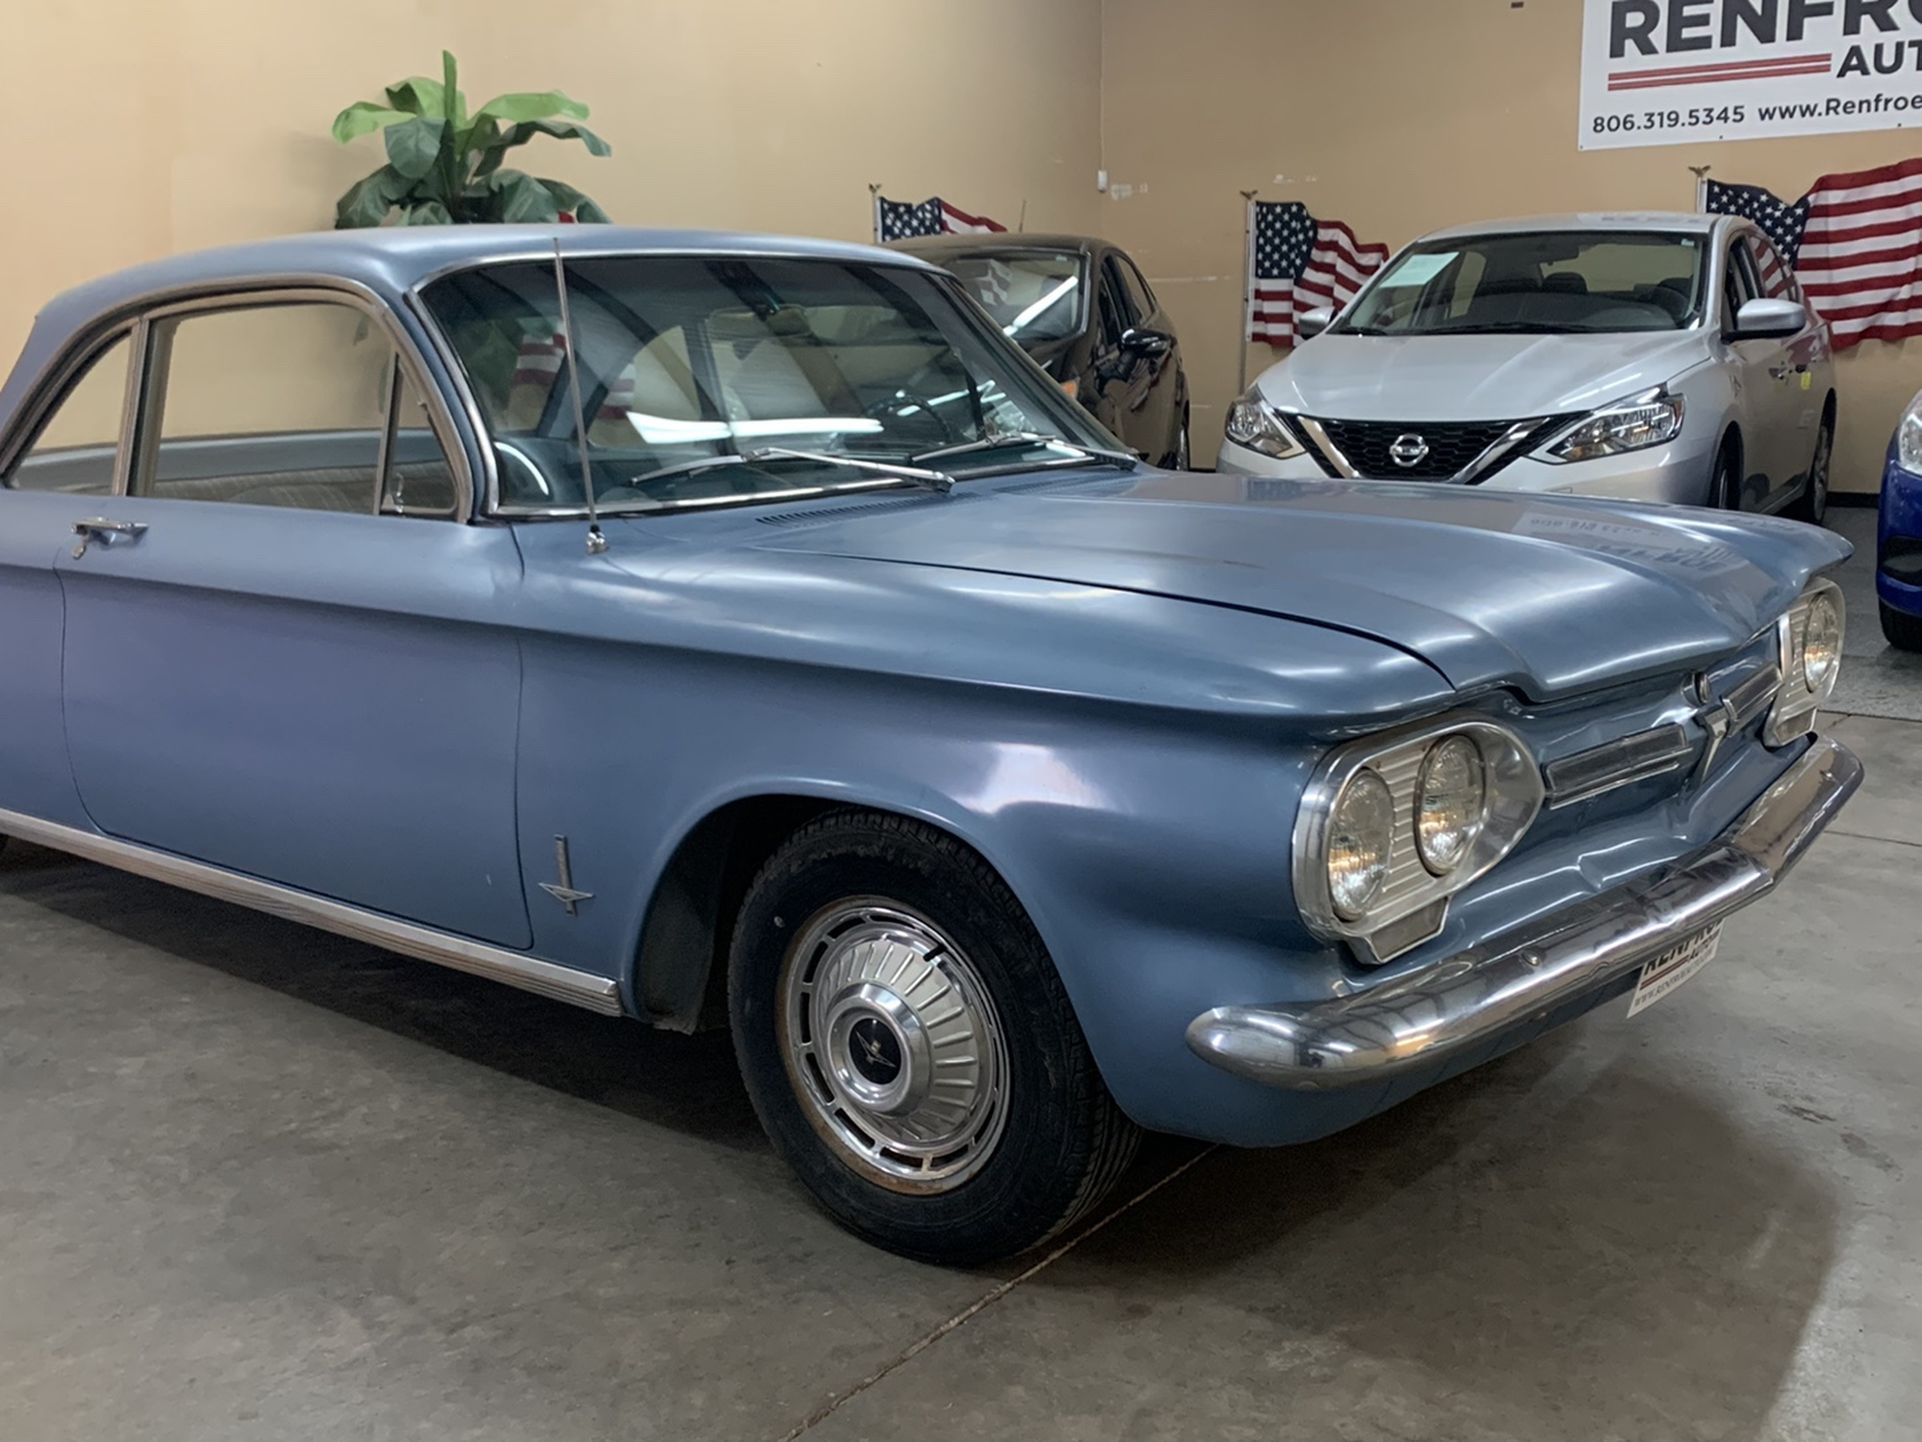 1962 Chevrolet Corvair Monza 900 Coupe - See Video!